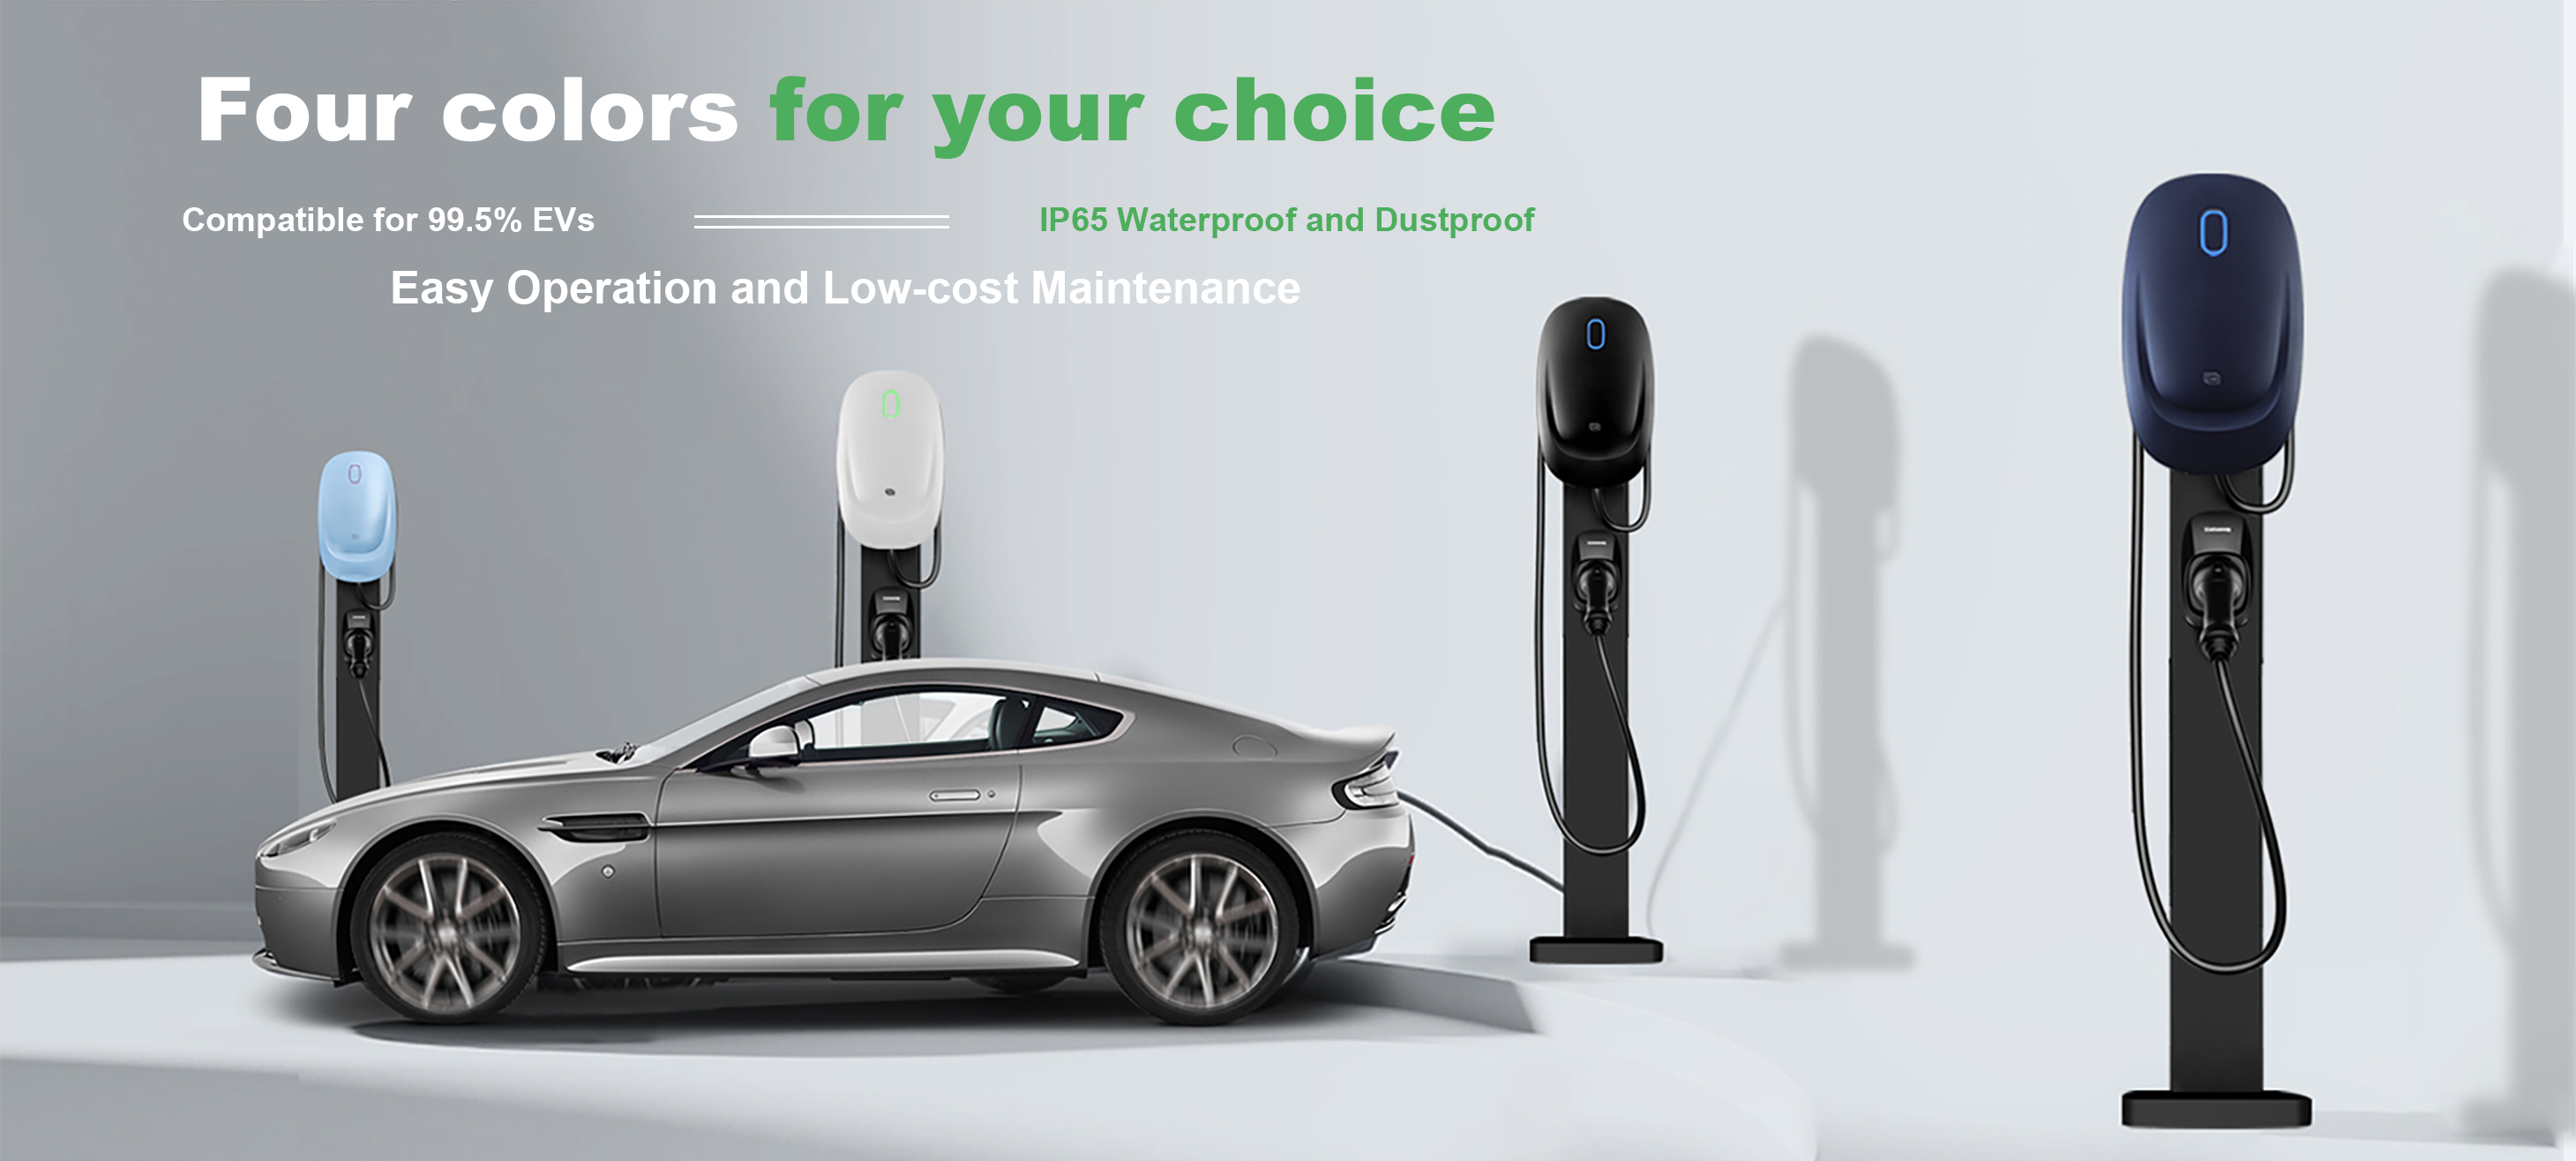 Ev Charger, Evse Charger, Car Charger - iEVLEAD